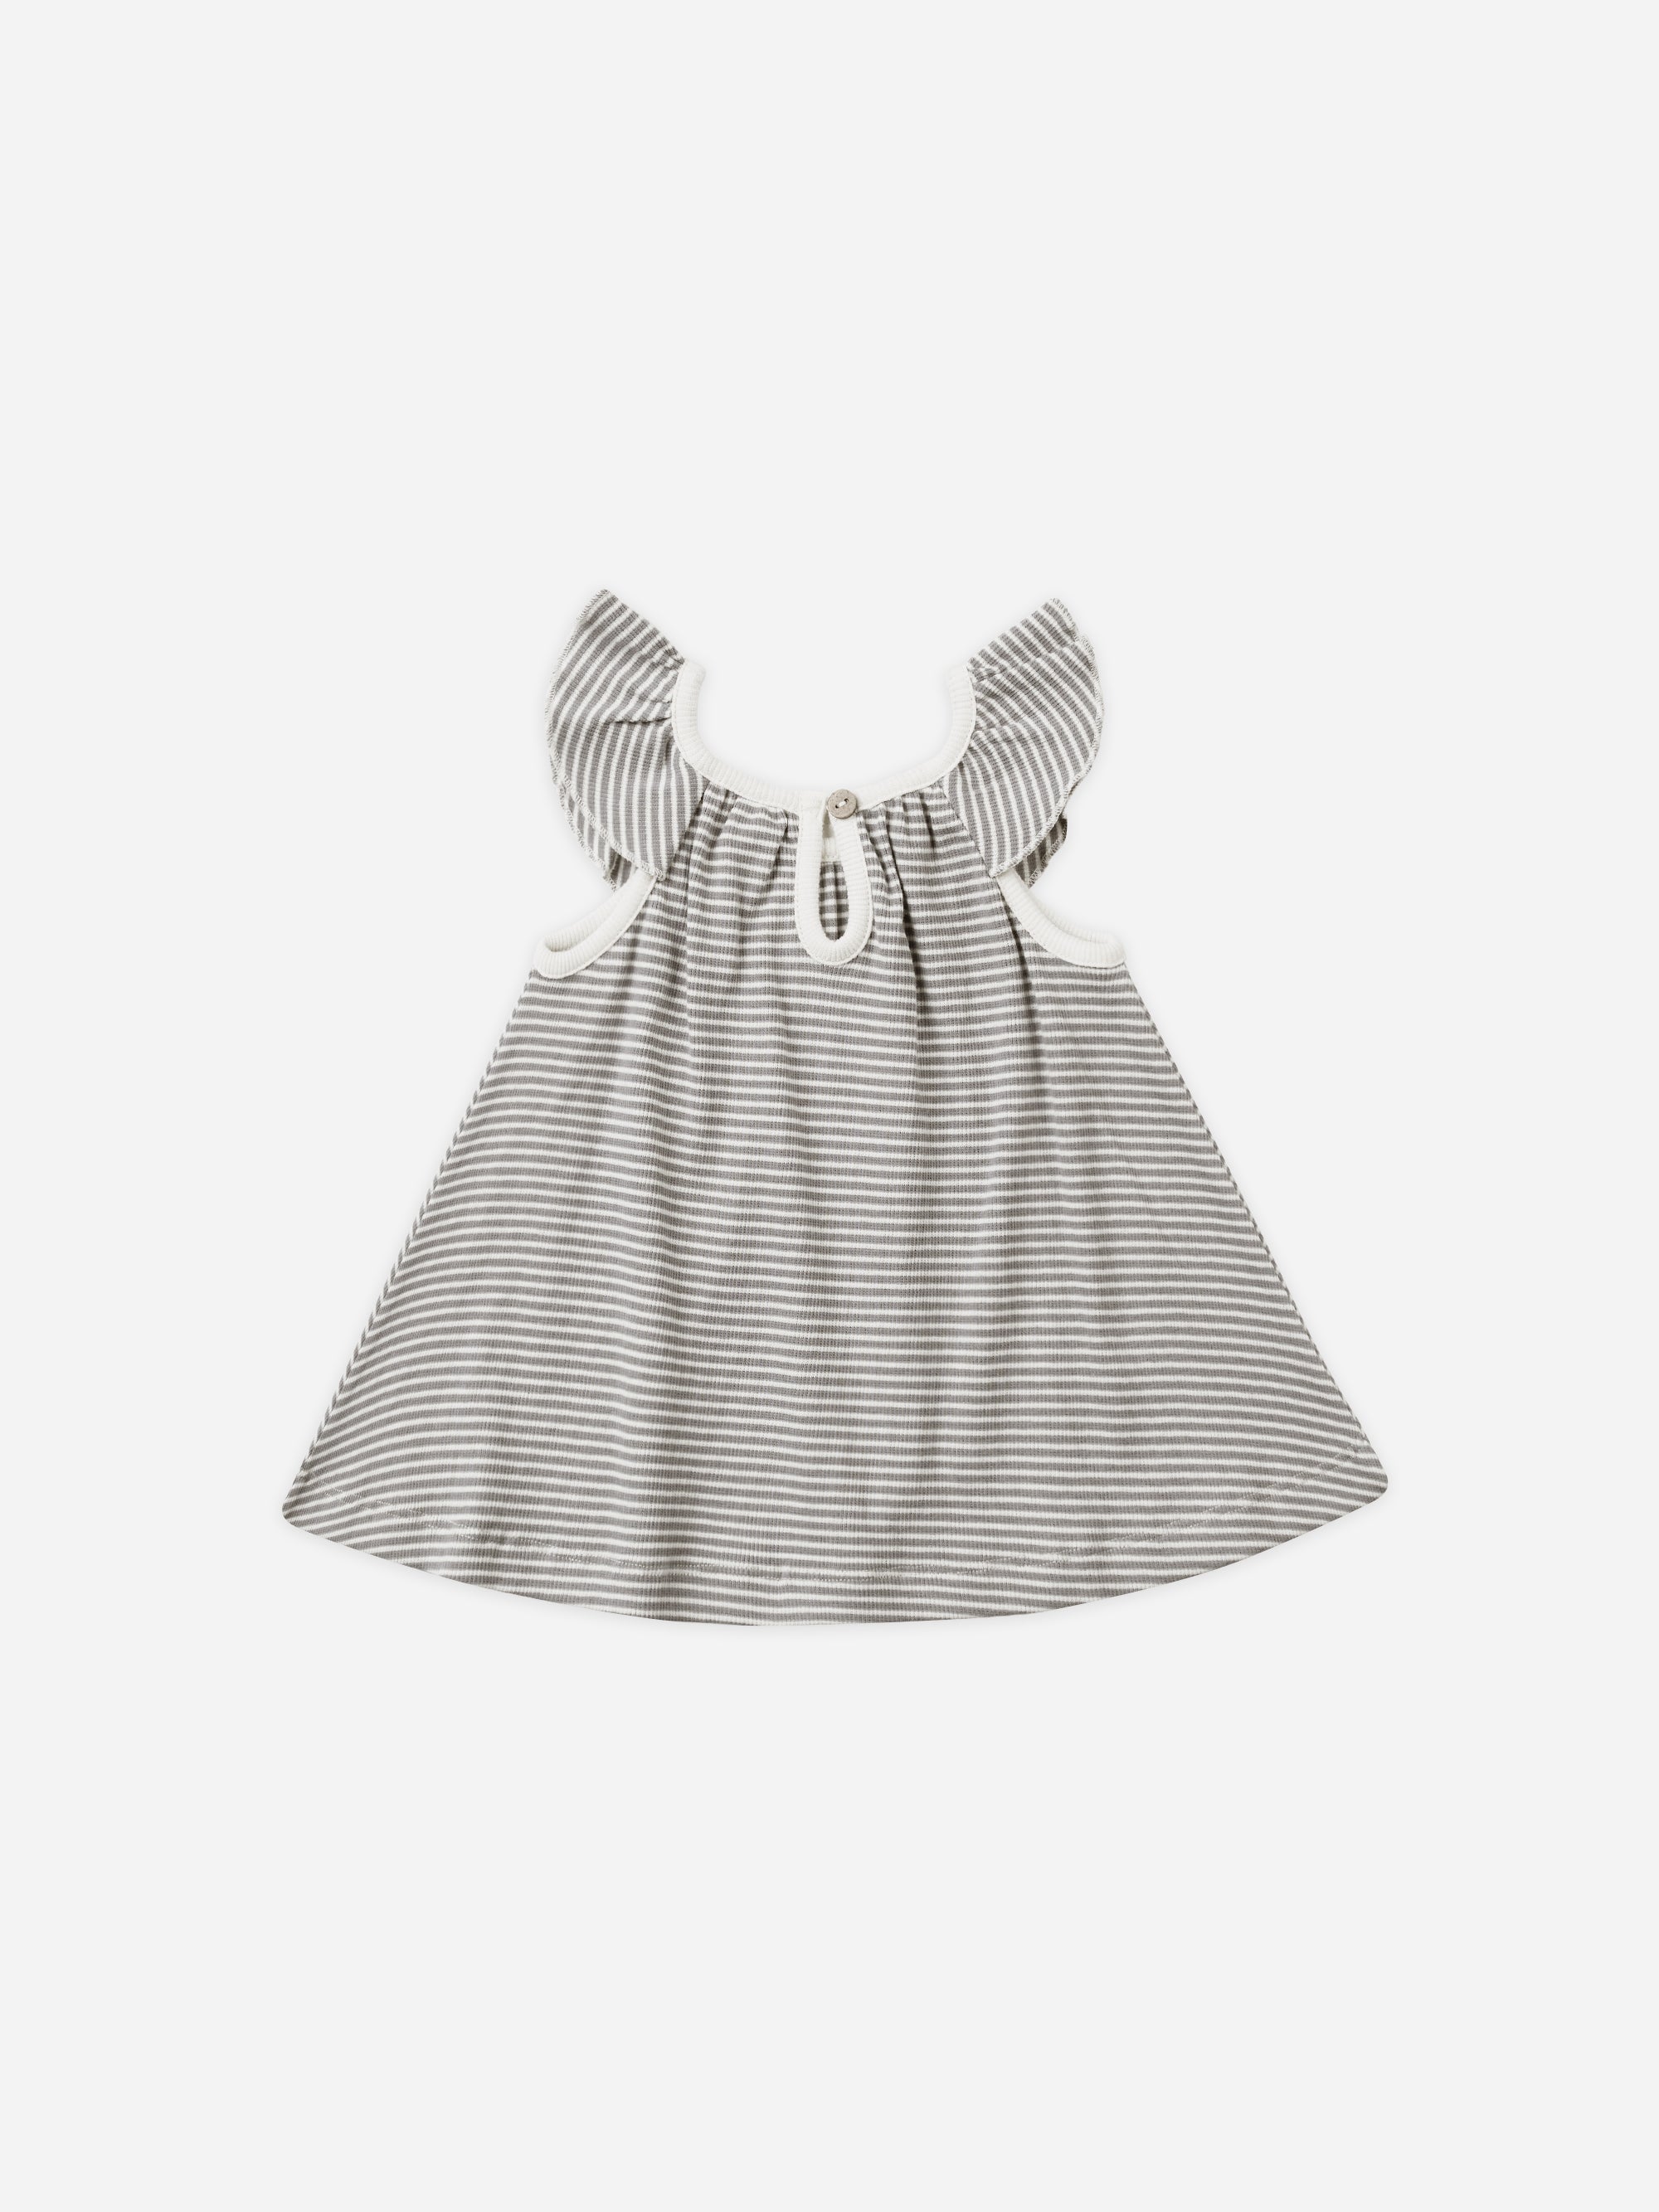 Ruffle Swing Dress || Lagoon Micro Stripe - Rylee + Cru | Kids Clothes | Trendy Baby Clothes | Modern Infant Outfits |